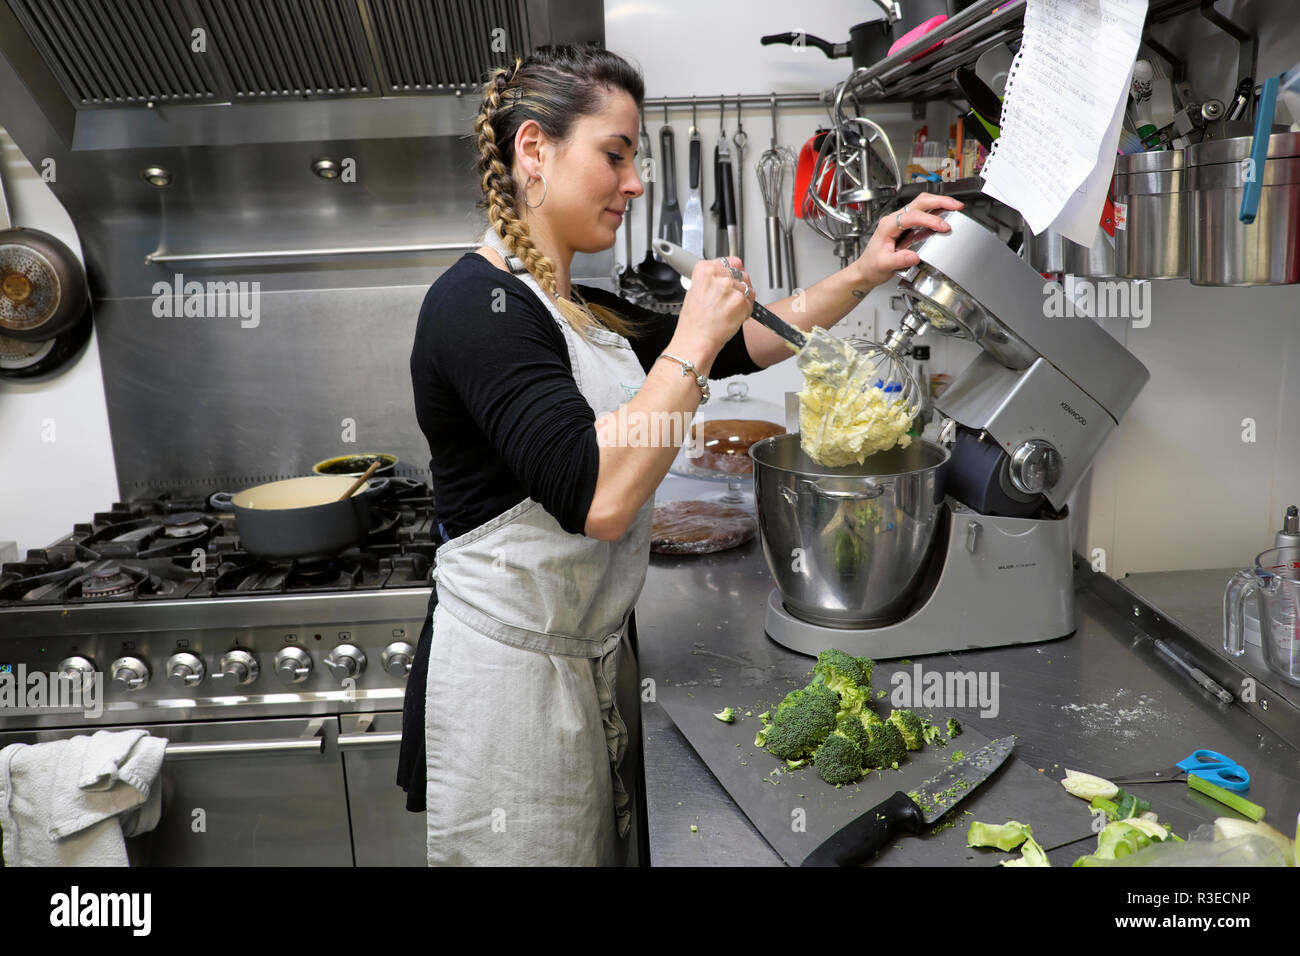 A smiling young female chef preparing food in the kitchen of the contemporary Old Printing Office cafe restaurant in Llandovery Wales UK  KATHY DEWITT Stock Photo